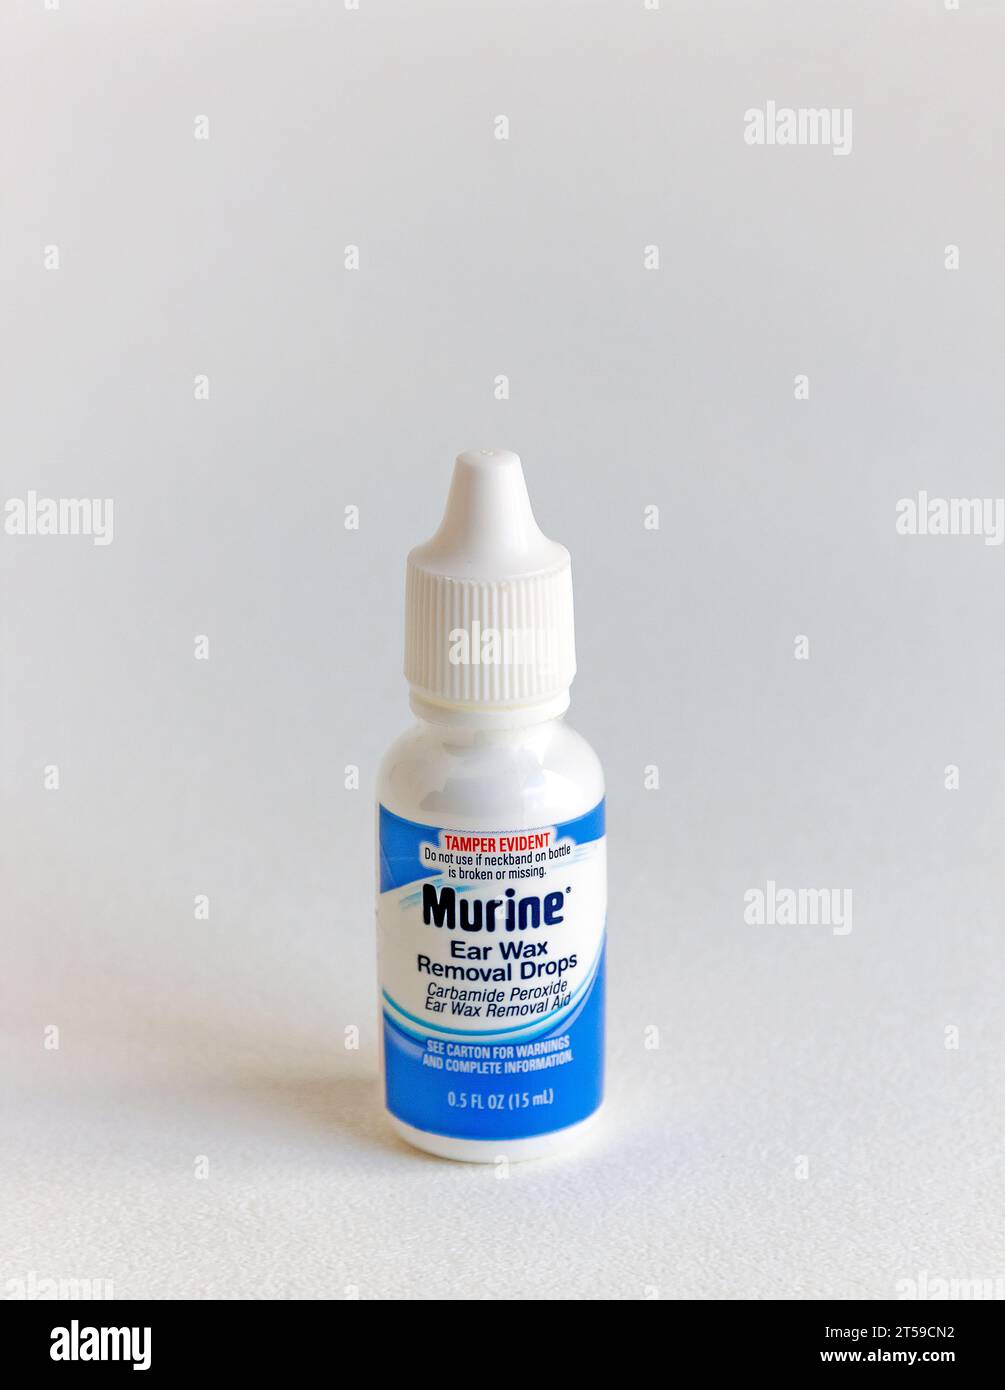 Murine Ear Wax Removal Drops helps to soften, loosen, dissolve and remove ear wax. Stock Photo